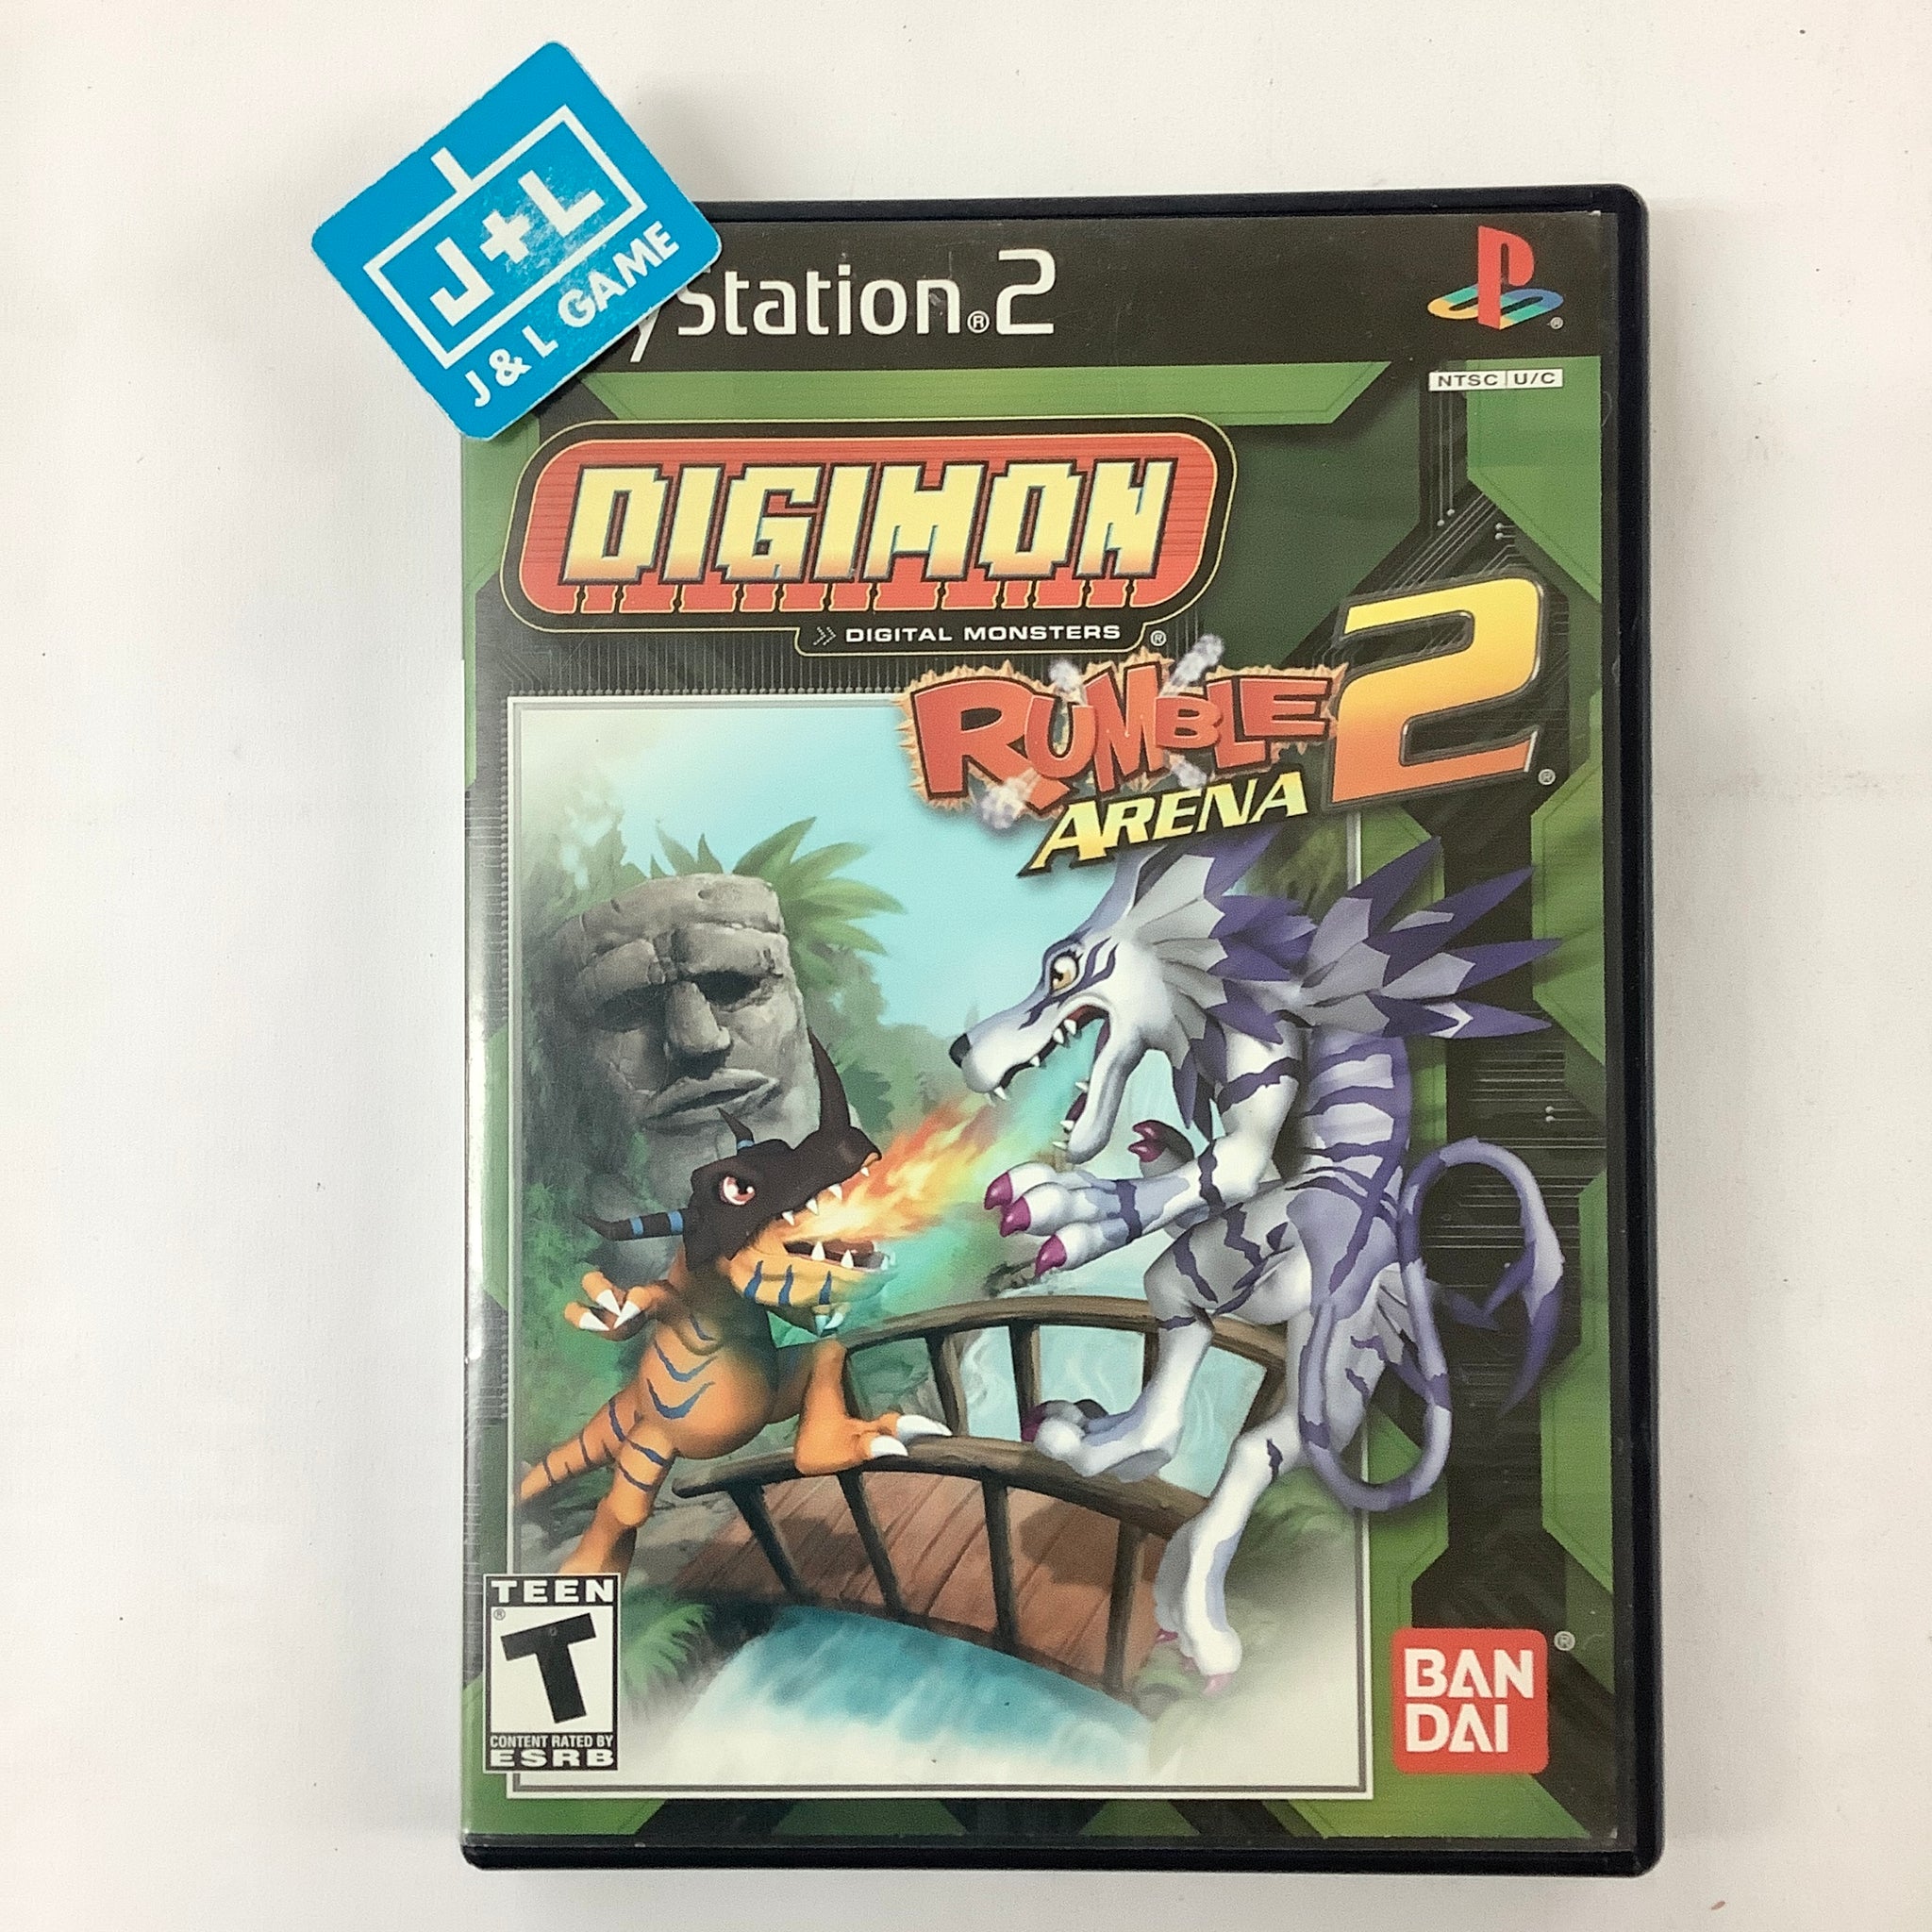 PS2 GAMES COLLECTION (Digimon Rumble Arena 2)